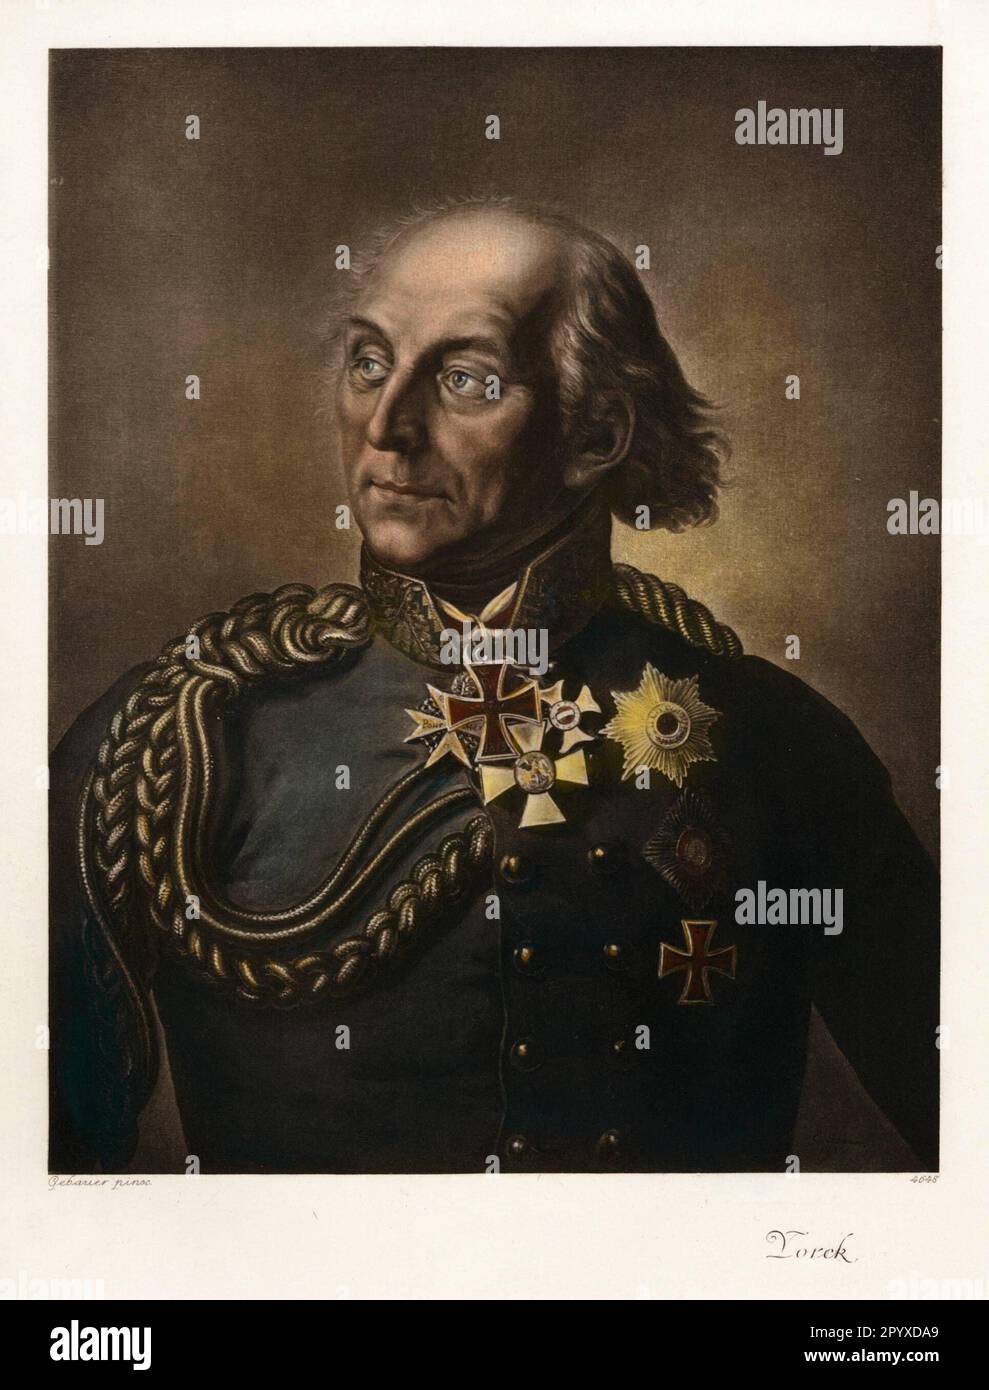 Hans David Ludwig Count Yorck von Wartenburg (1759-1830), Prussian officer. Painting by Gebauer. Photo: Heliogravure, Corpus Imaginum, Hanfstaengl Collection. [automated translation] Stock Photo